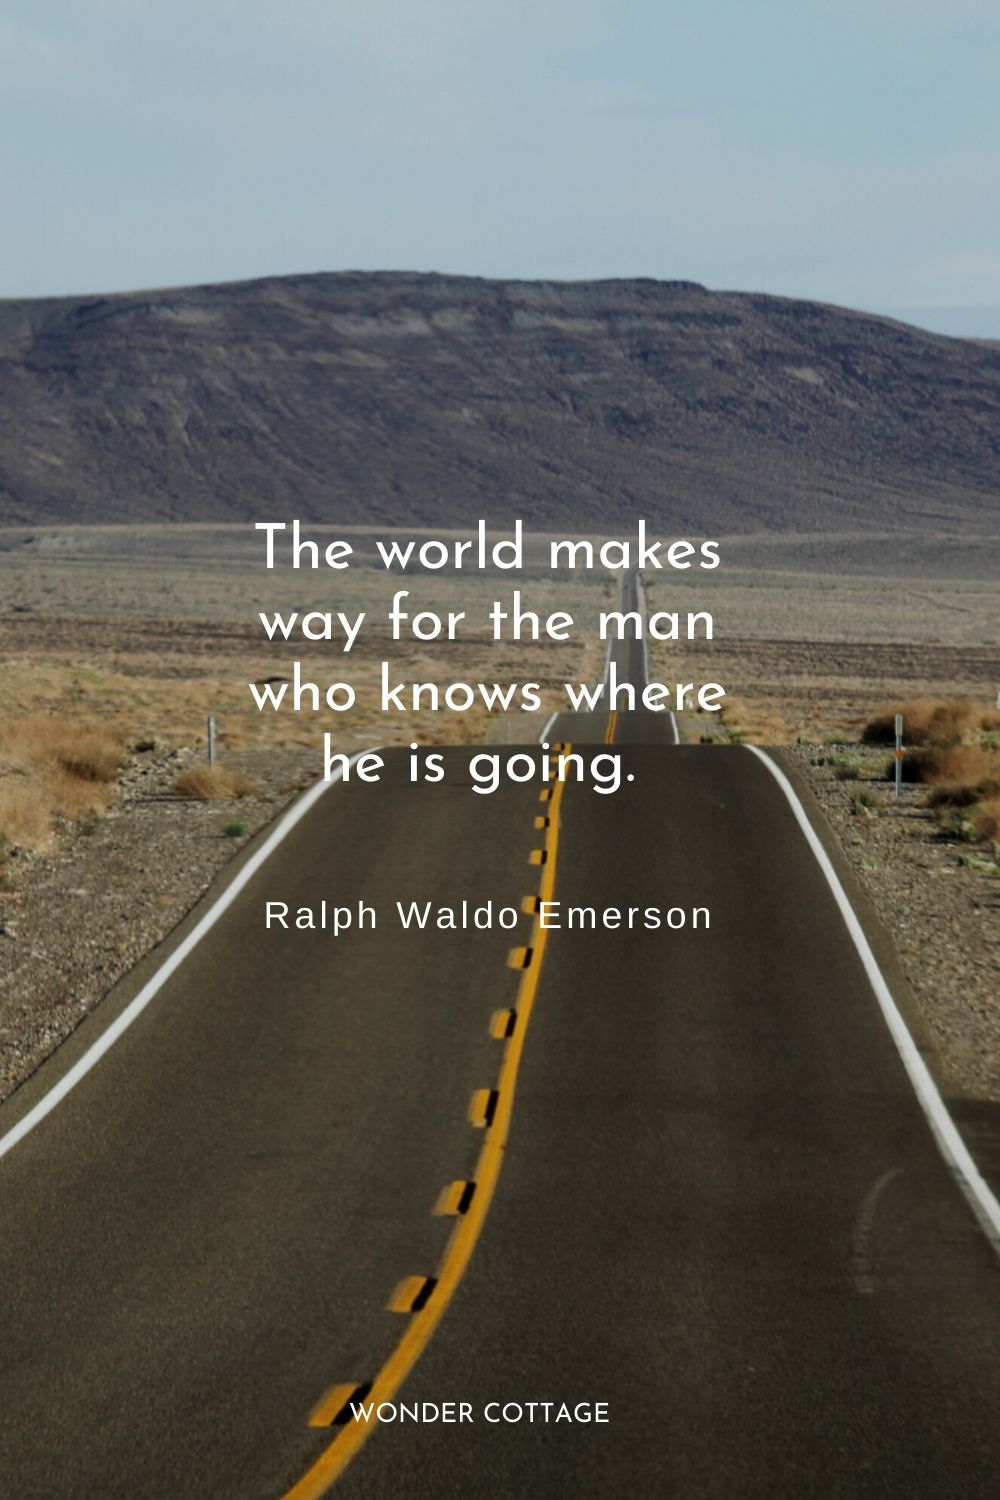 The world makes way for the man who knows where he is going.  Ralph Waldo Emerson